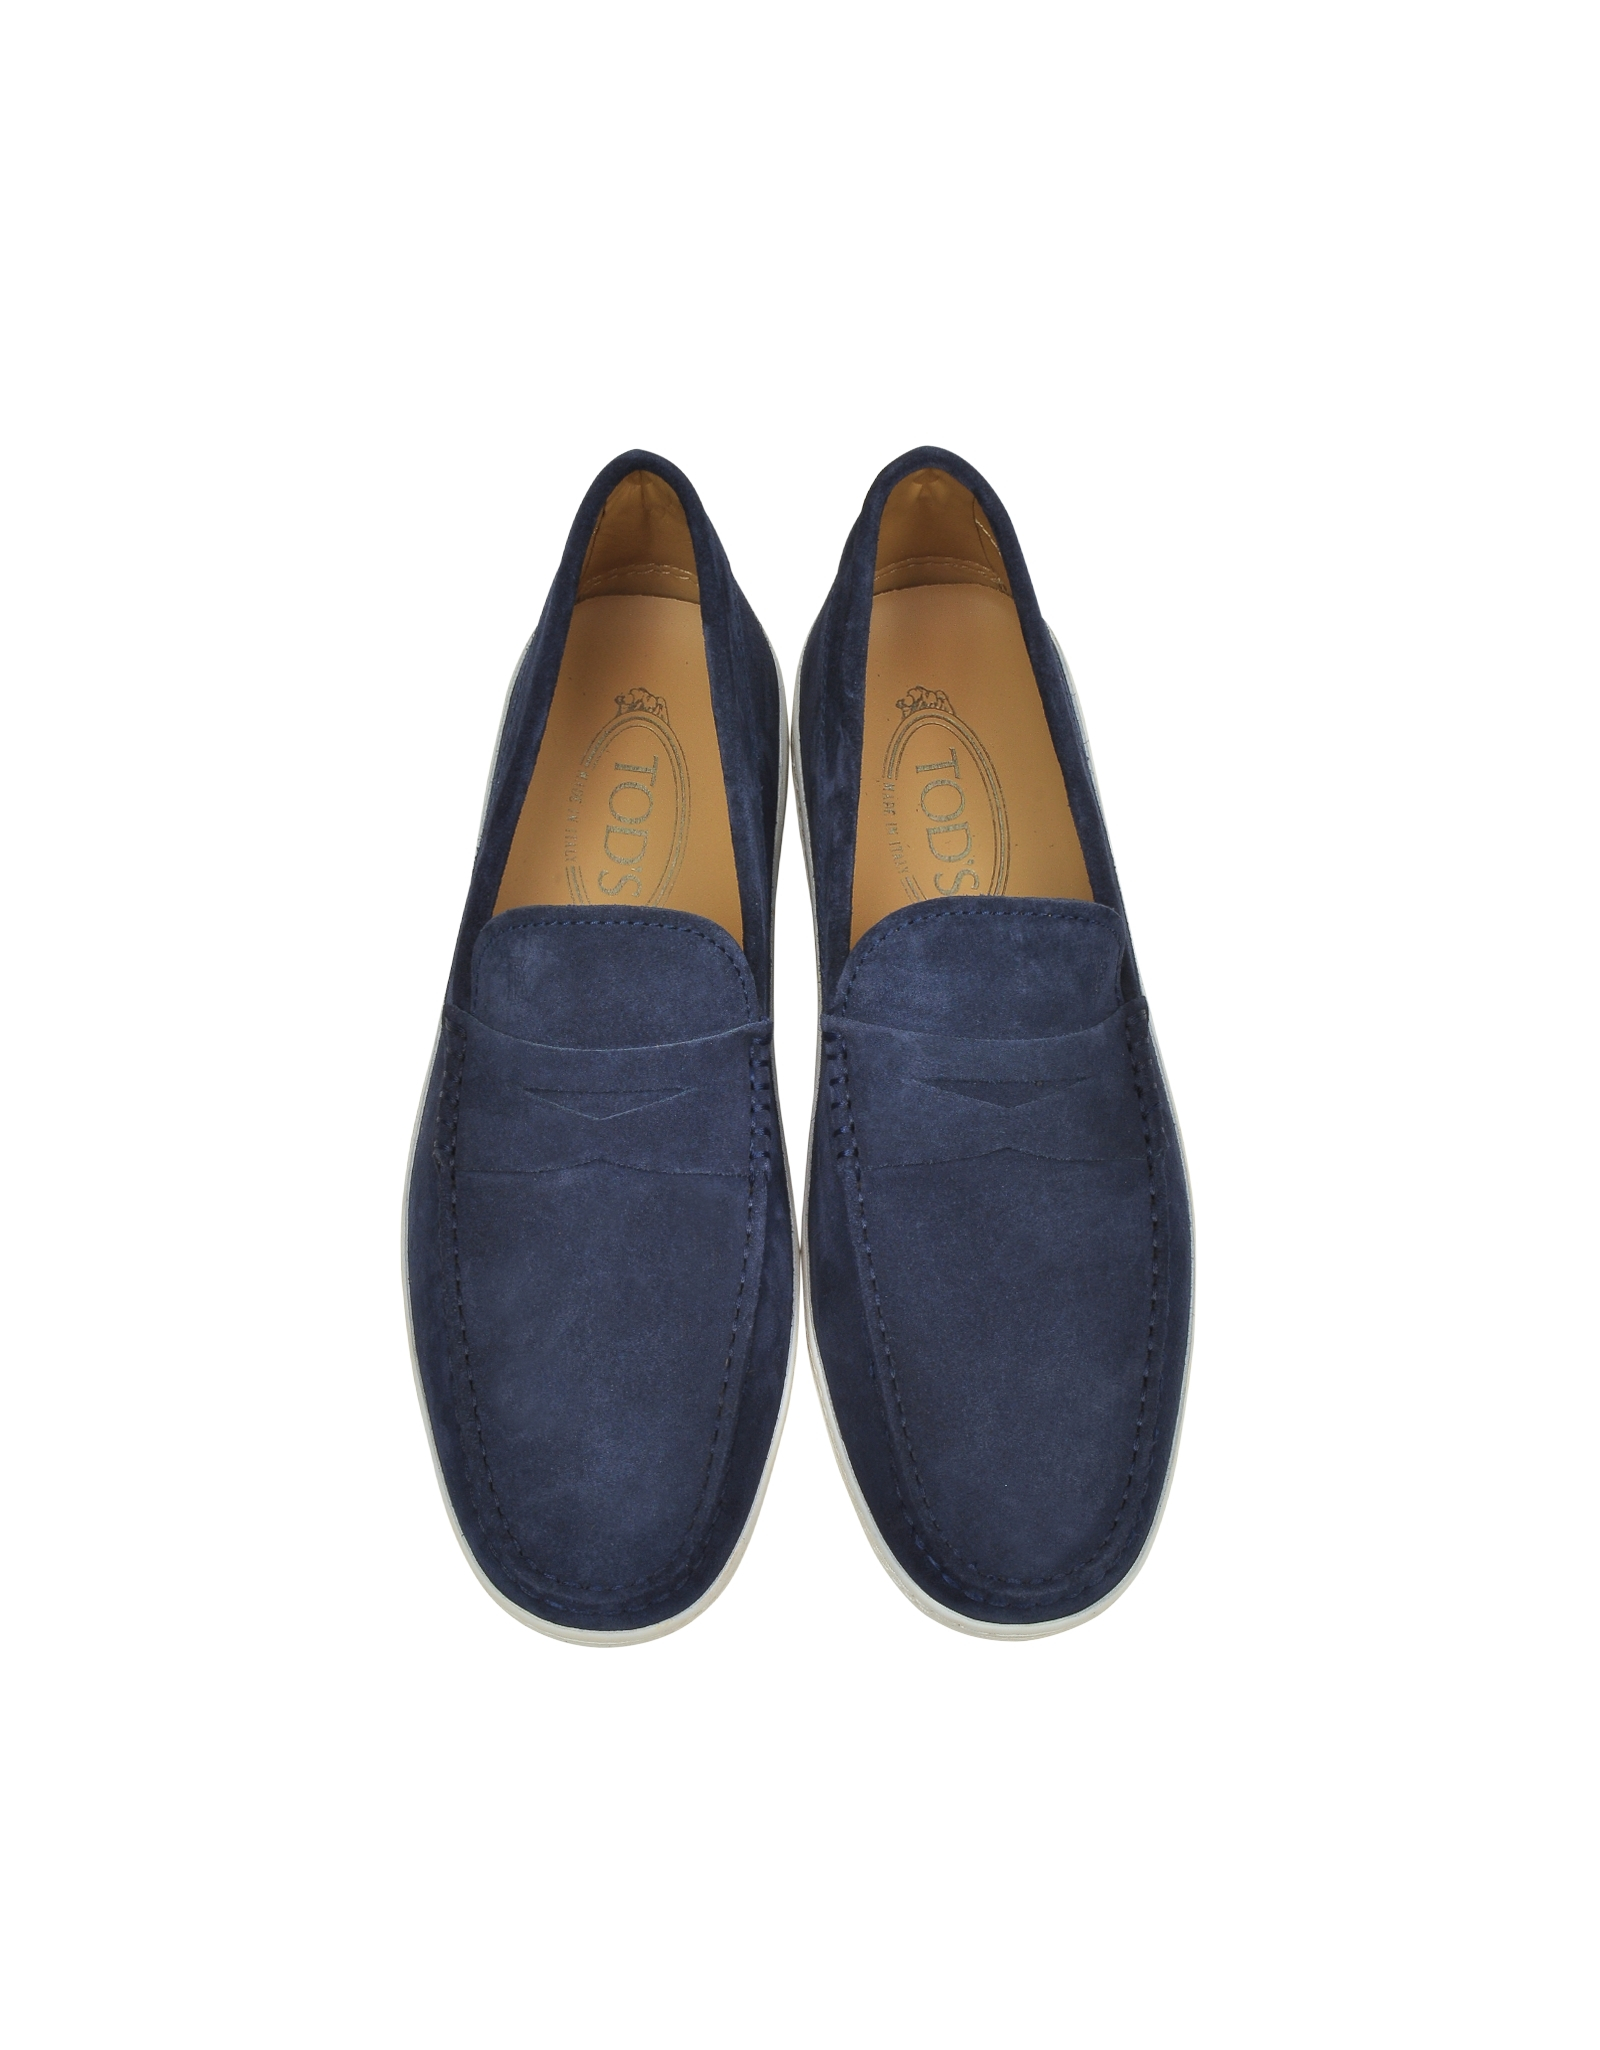 Tod's Marlin Blue Suede Mocassino Shoe for Men - Lyst